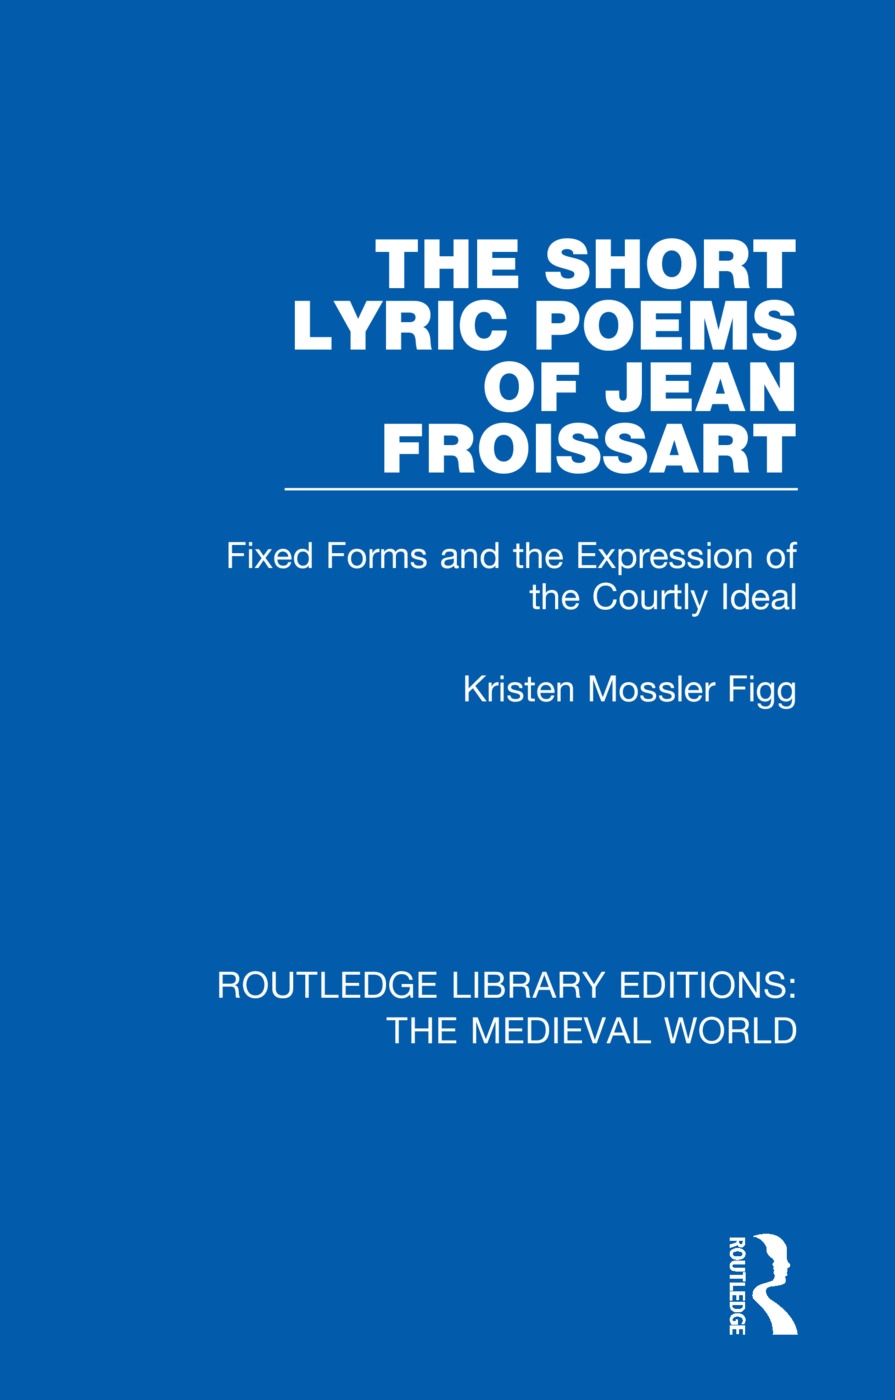 The Short Lyric Poems of Jean Froissart: Fixed Forms and the Expression of the Courtly Ideal